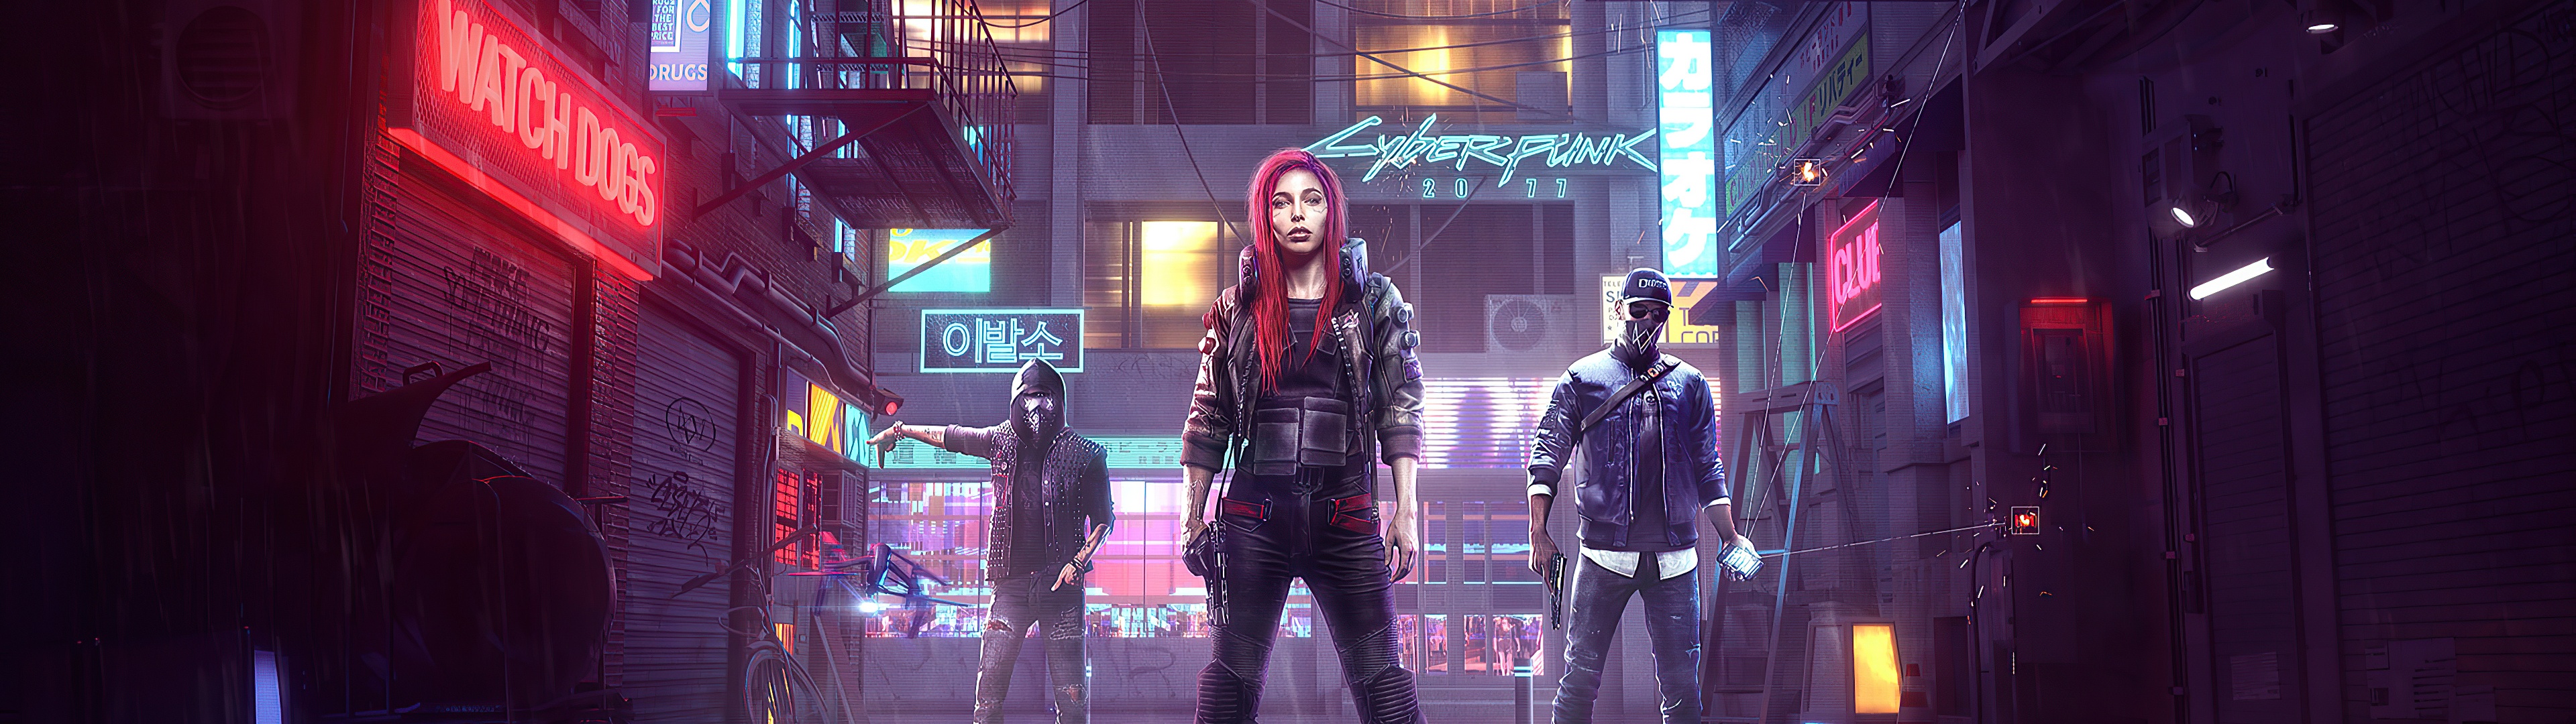 Cyberpunk 2077 on X: New wallpaper, anyone? 🚇 ➡   *** PS Our latest wallpapers are now also available in two more sizes:  3440x1440 and 3840x2160!  / X